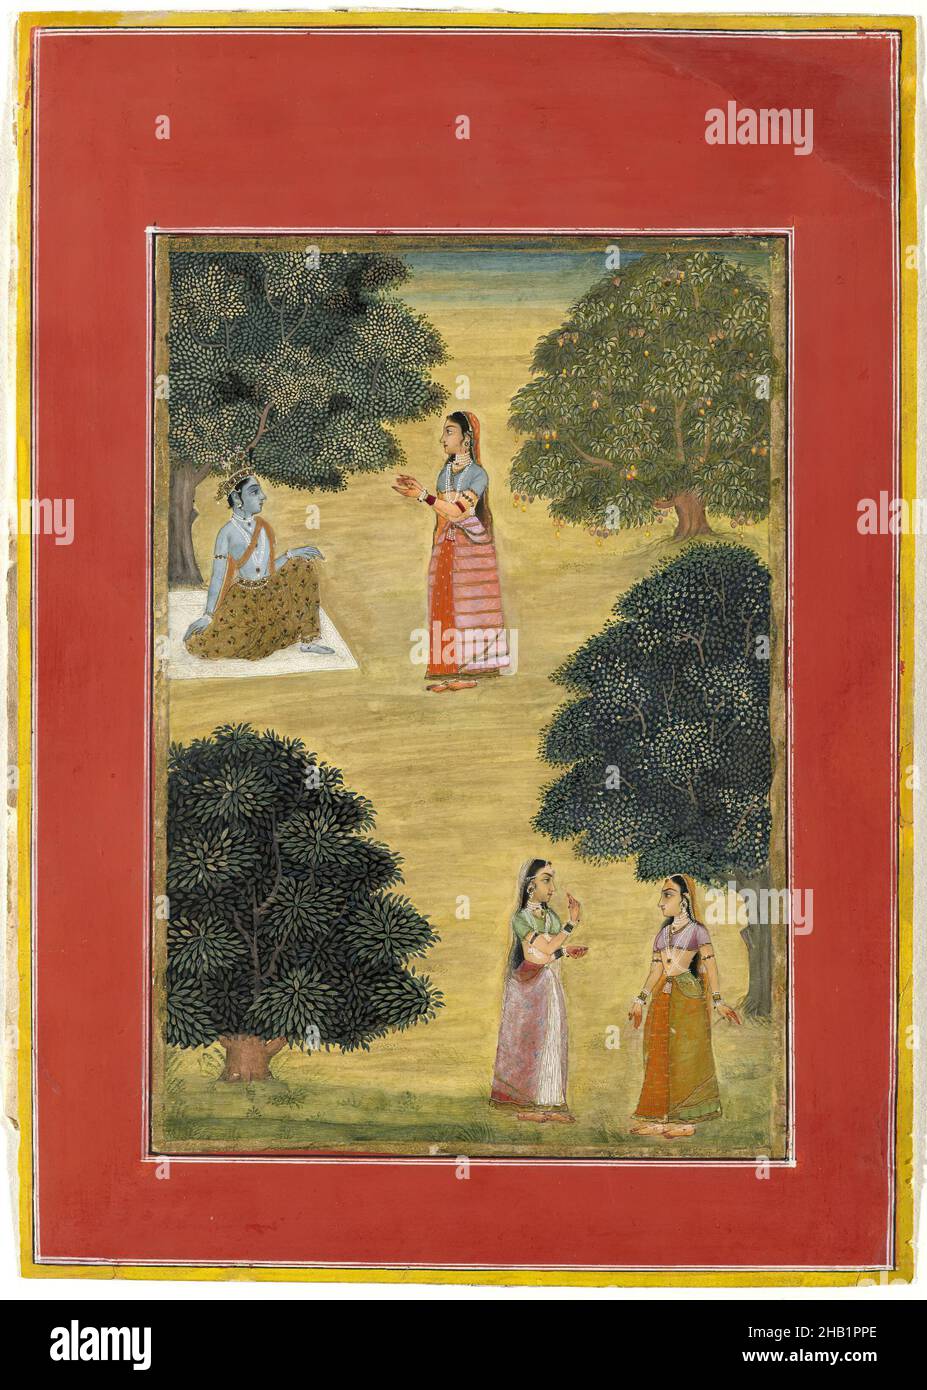 Krishna and Radha, Ruknudin, Opaque watercolor on paper, Bikaner, Rajasthan, India, 1684, Image: 10 5/8 x 7 5/8 in., 27 x 19.3 cm, 1690, figures, gold, India, Indian, Northern India, opaque watercolor, painting, paper, radha, Satasai, trees, watercolor Stock Photo